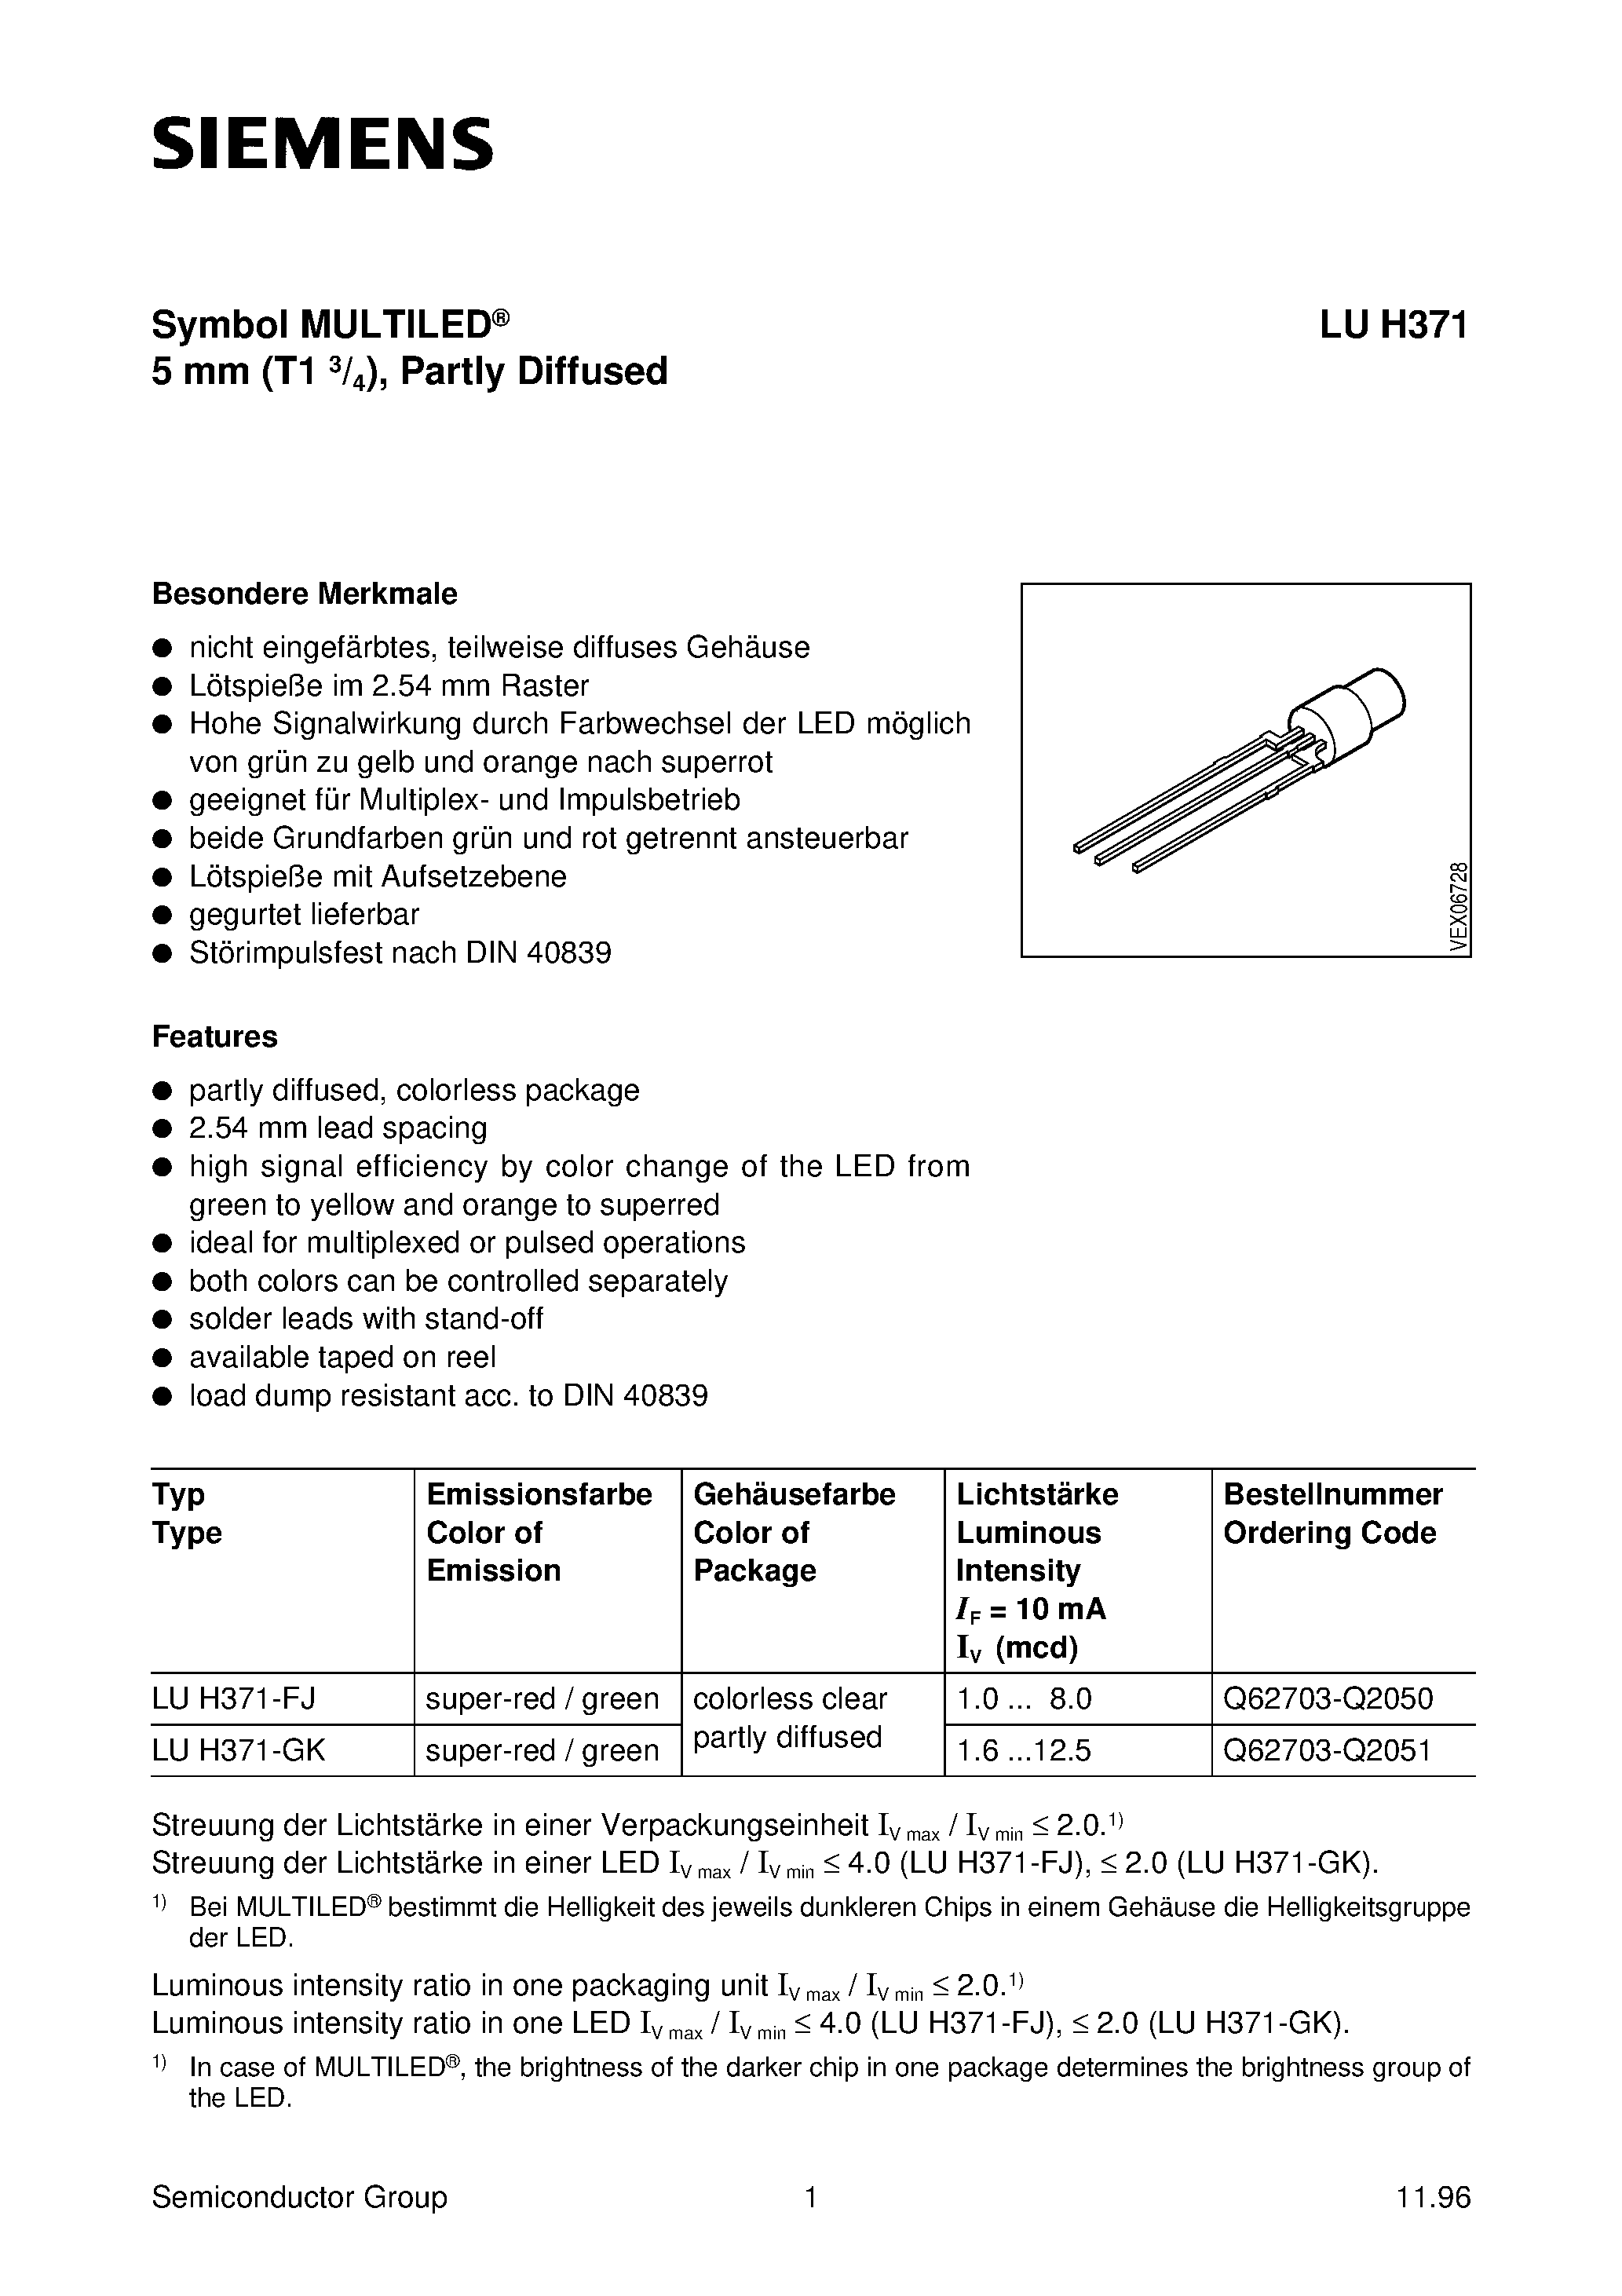 Datasheet LUH371 - Symbol MULTILED 5 mm T1 3/4/ Partly Diffused page 1